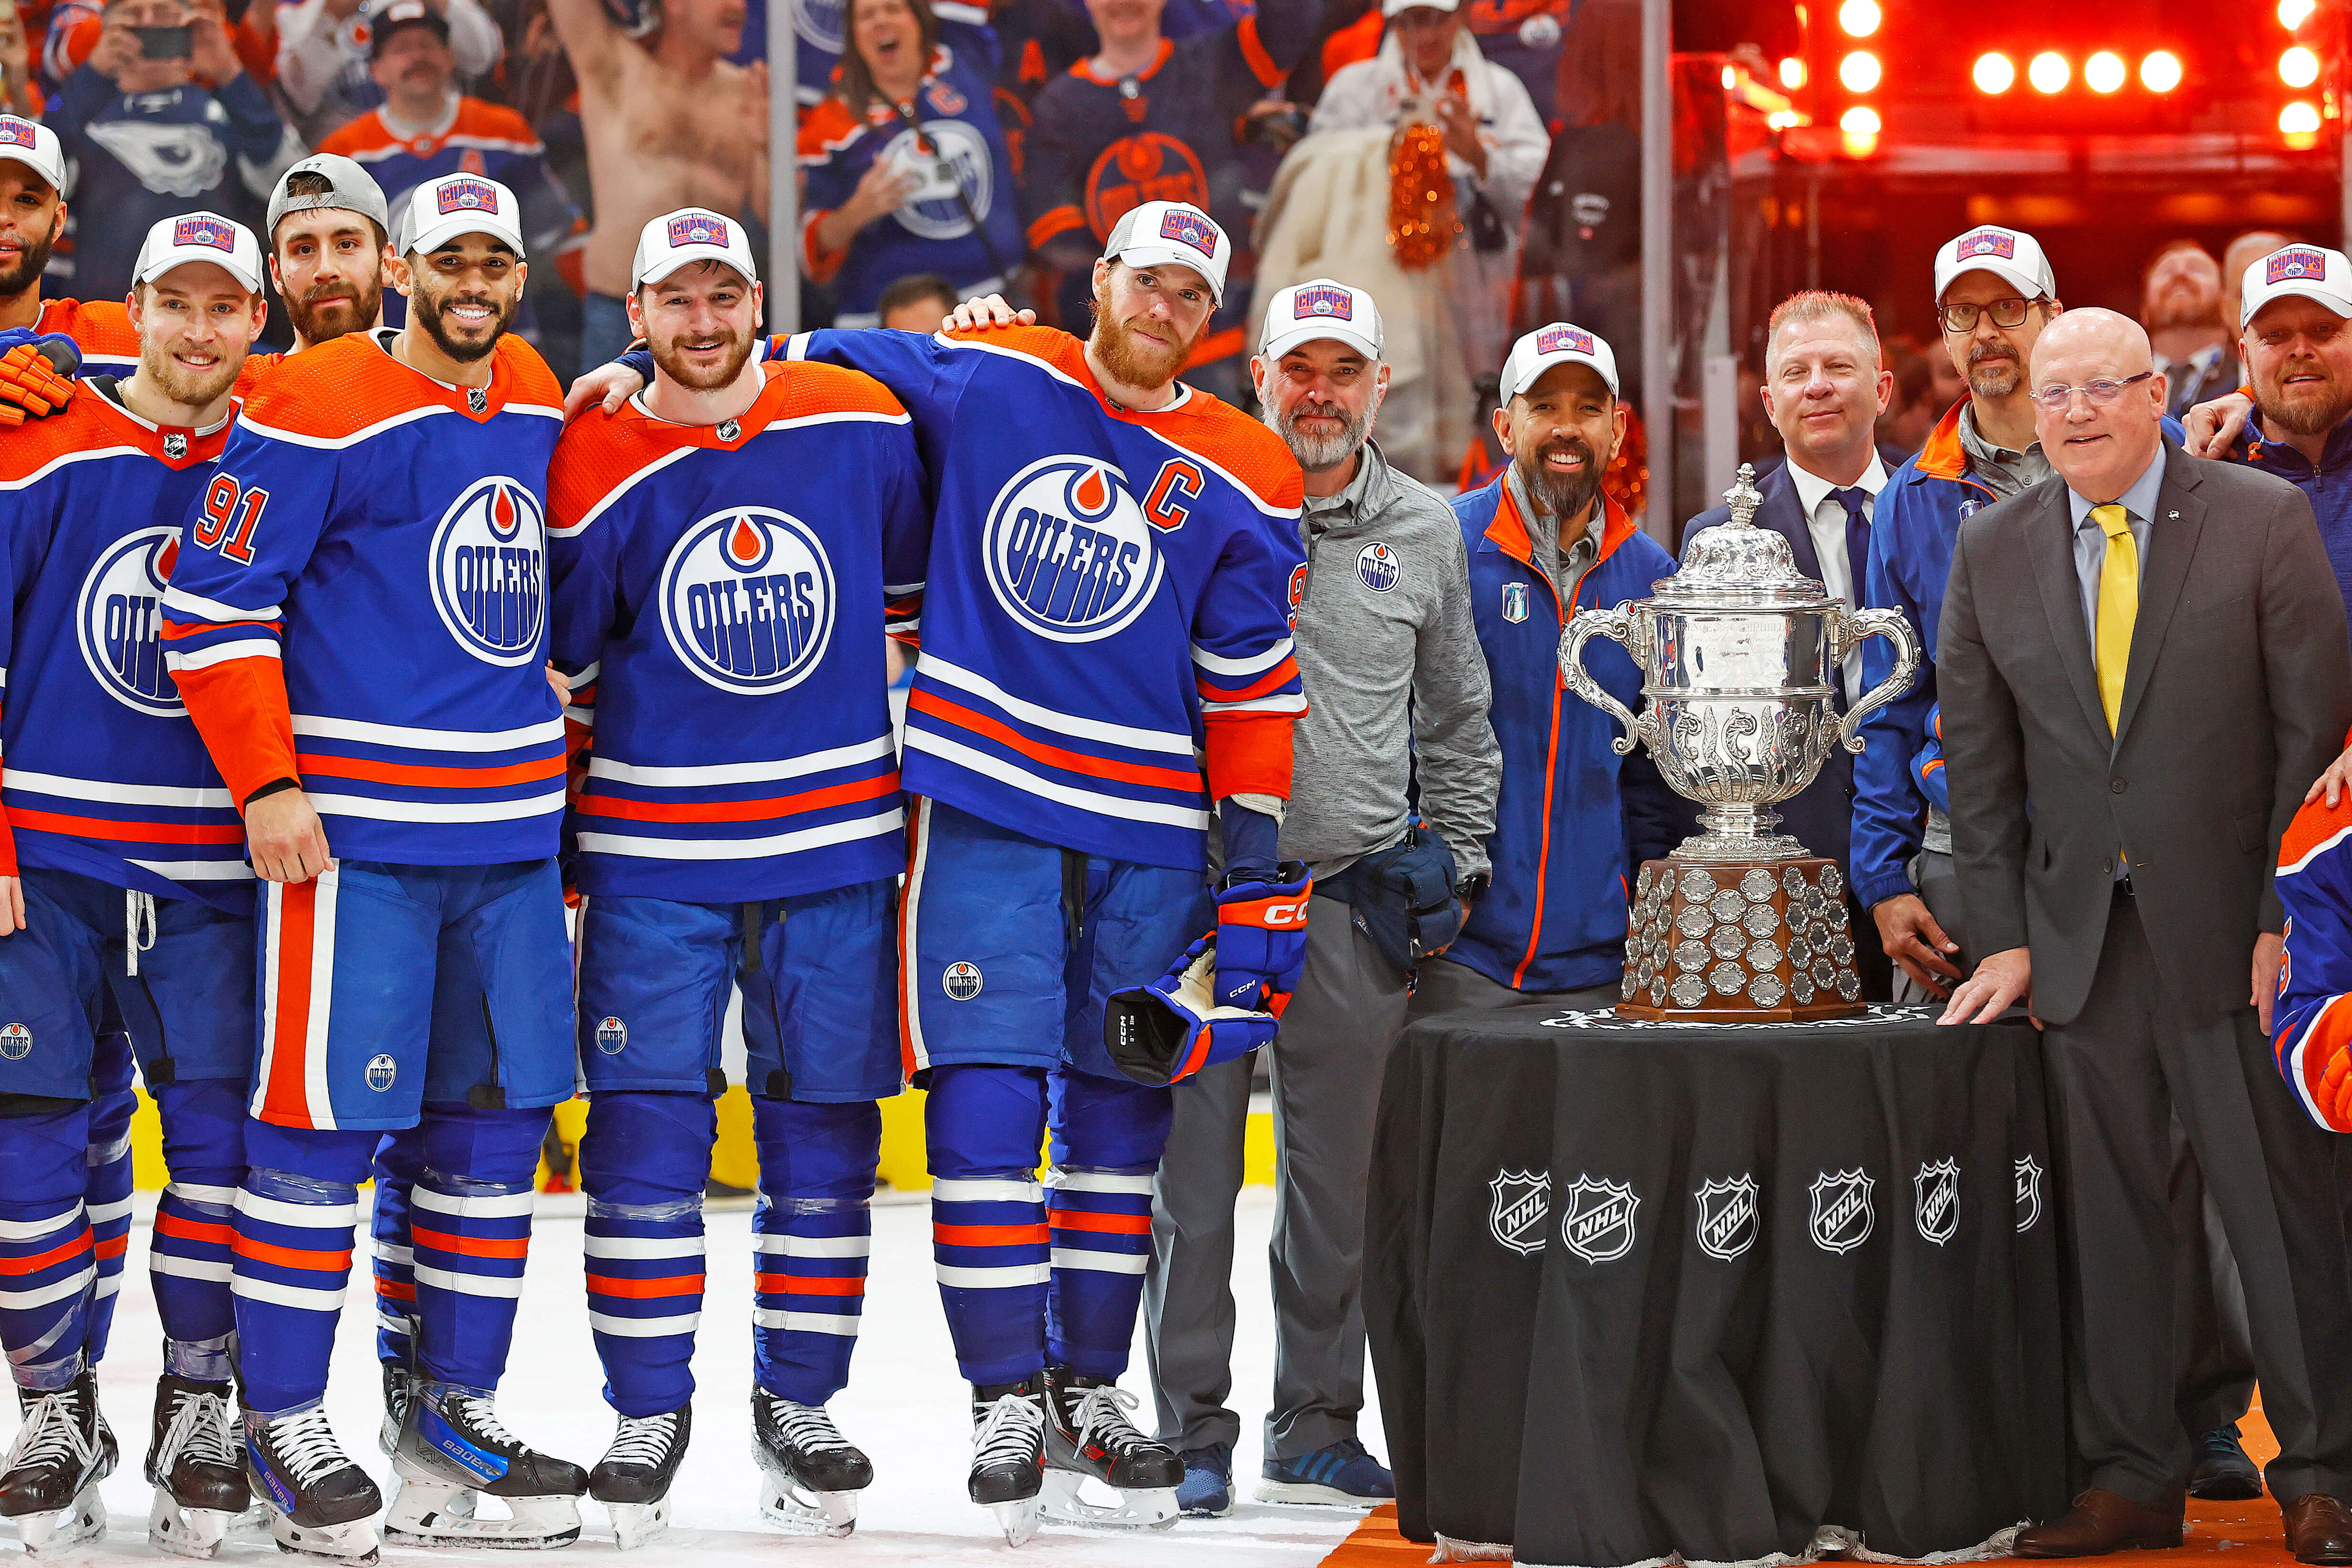 How To Bet - Alberta’s Only Legal Sports Betting Site Braces for an Oilers Stanley Cup, Fresh Competition